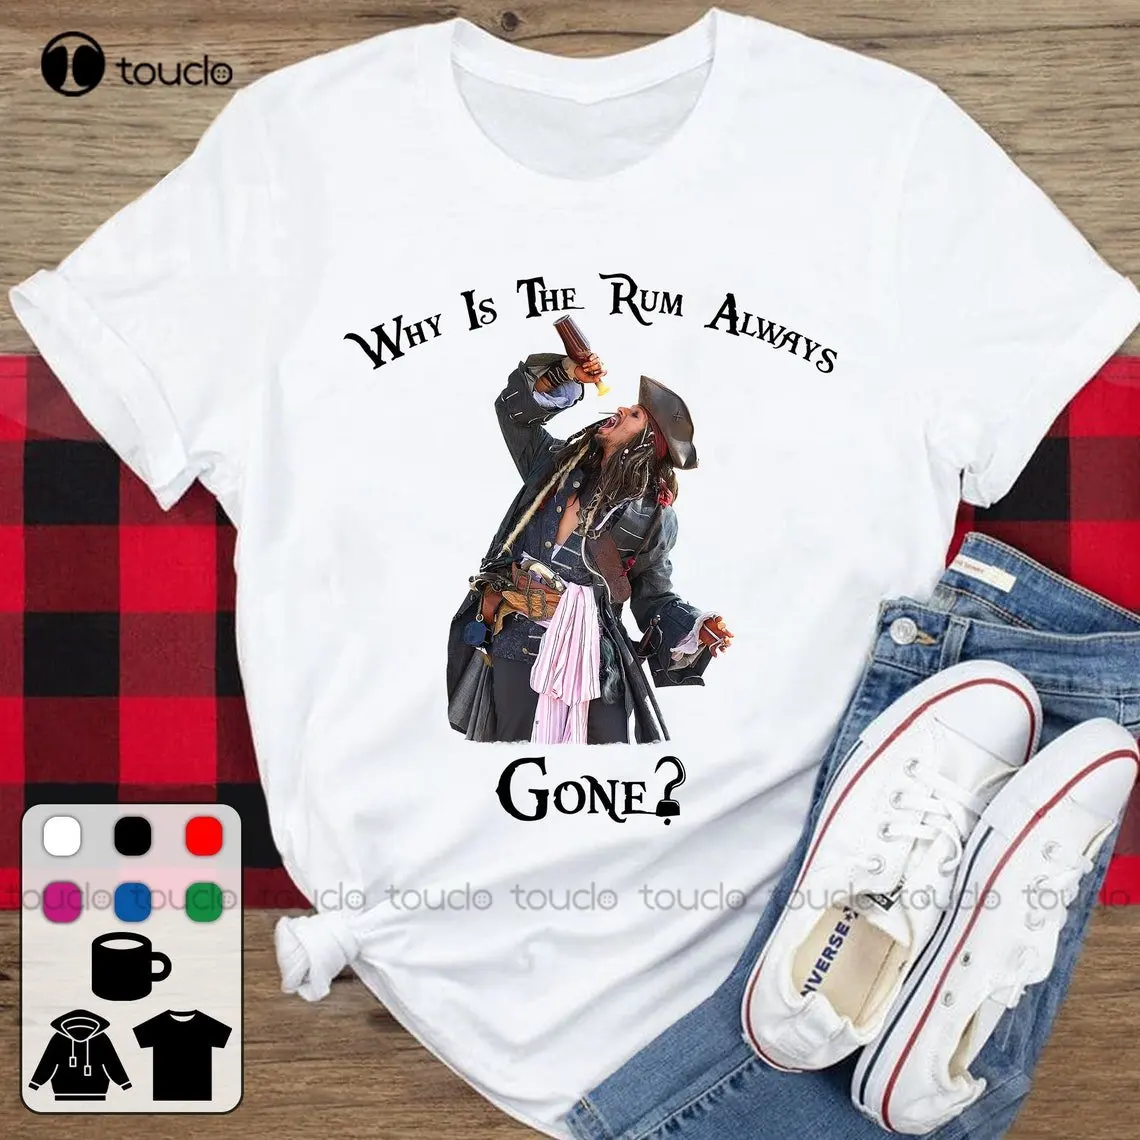 

Why Is The Rum Always Gone Captain Jack Justice For Johnny Depp Shirt Work Shirt Funny Art Streetwear Cartoon Tee New Popular